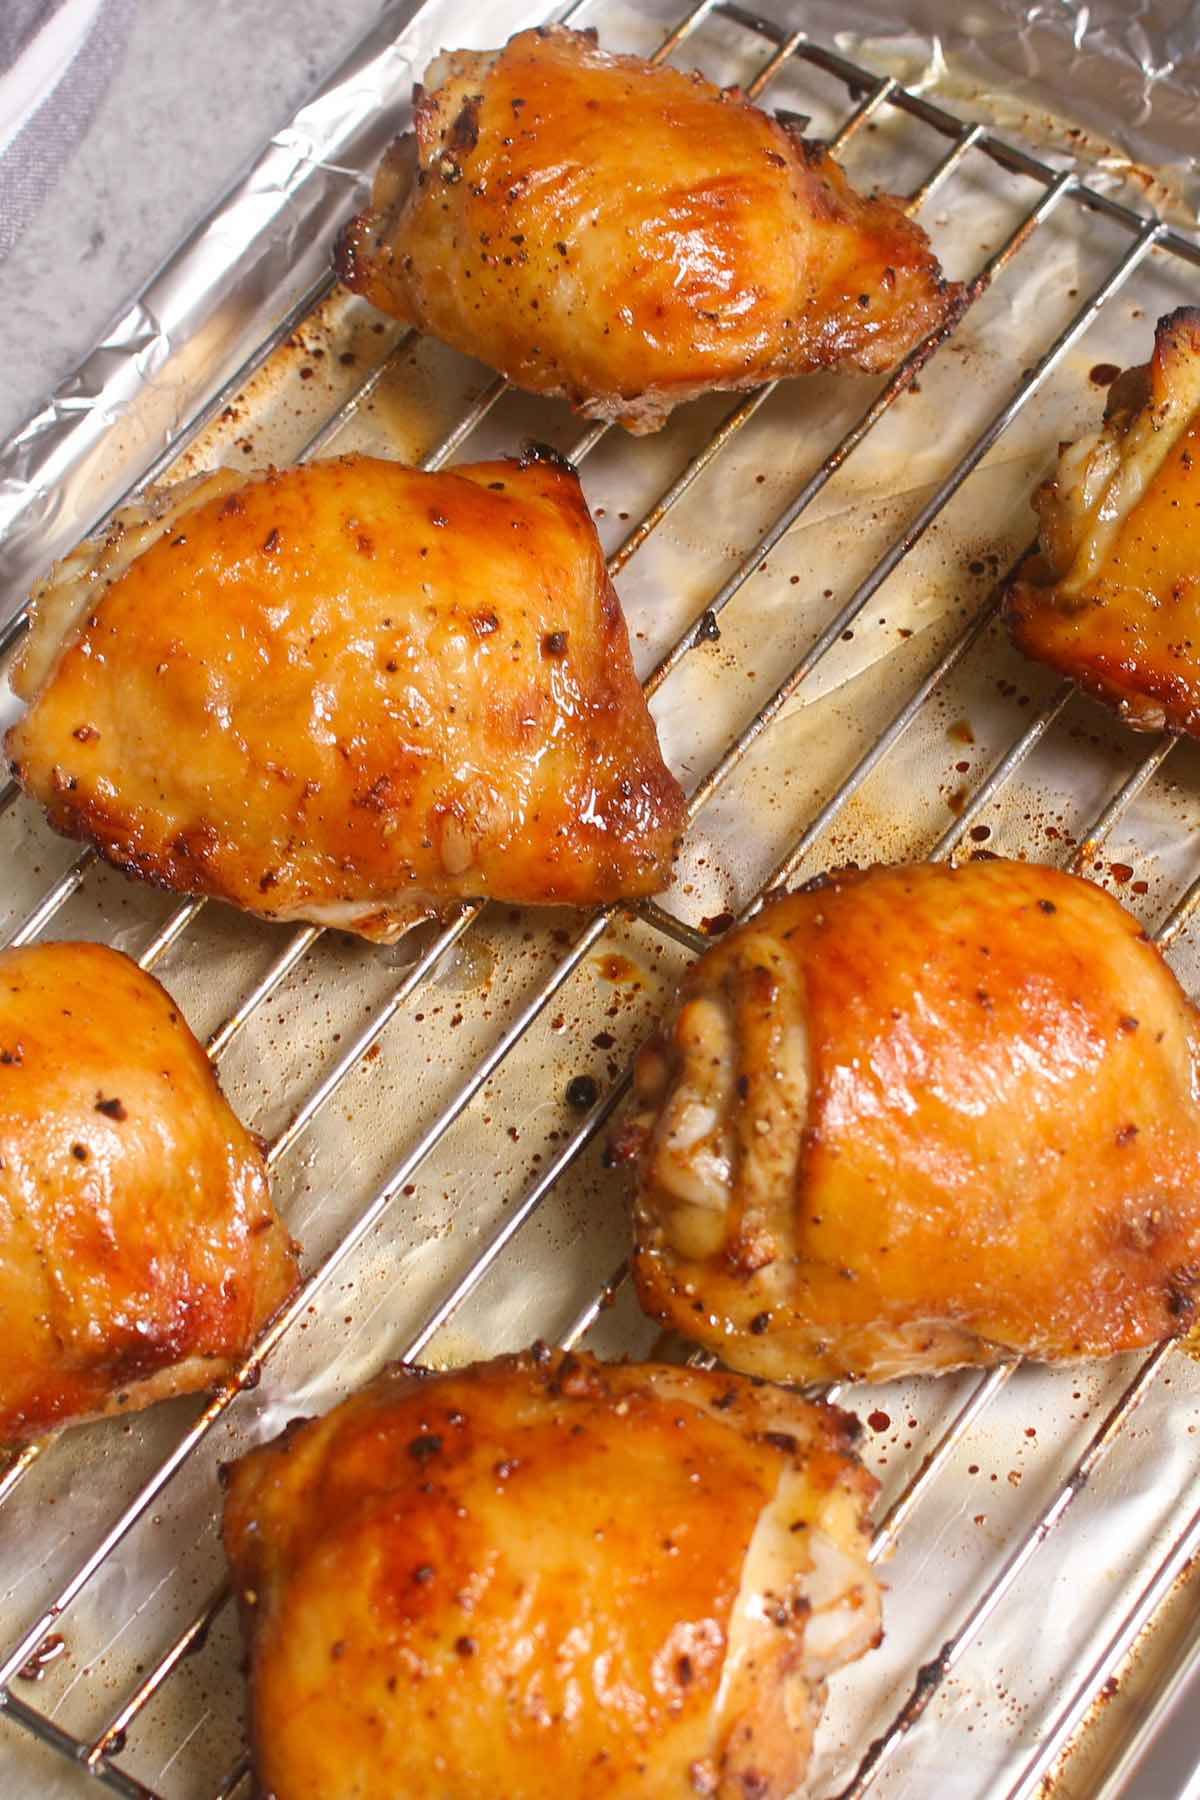 Oven Baked Chicken Thighs are crispy on the outside with tender dark meat on the inside. With a few tips and some simple ingredients, these never-dry chicken thighs can be easily made at home with restaurant-quality!